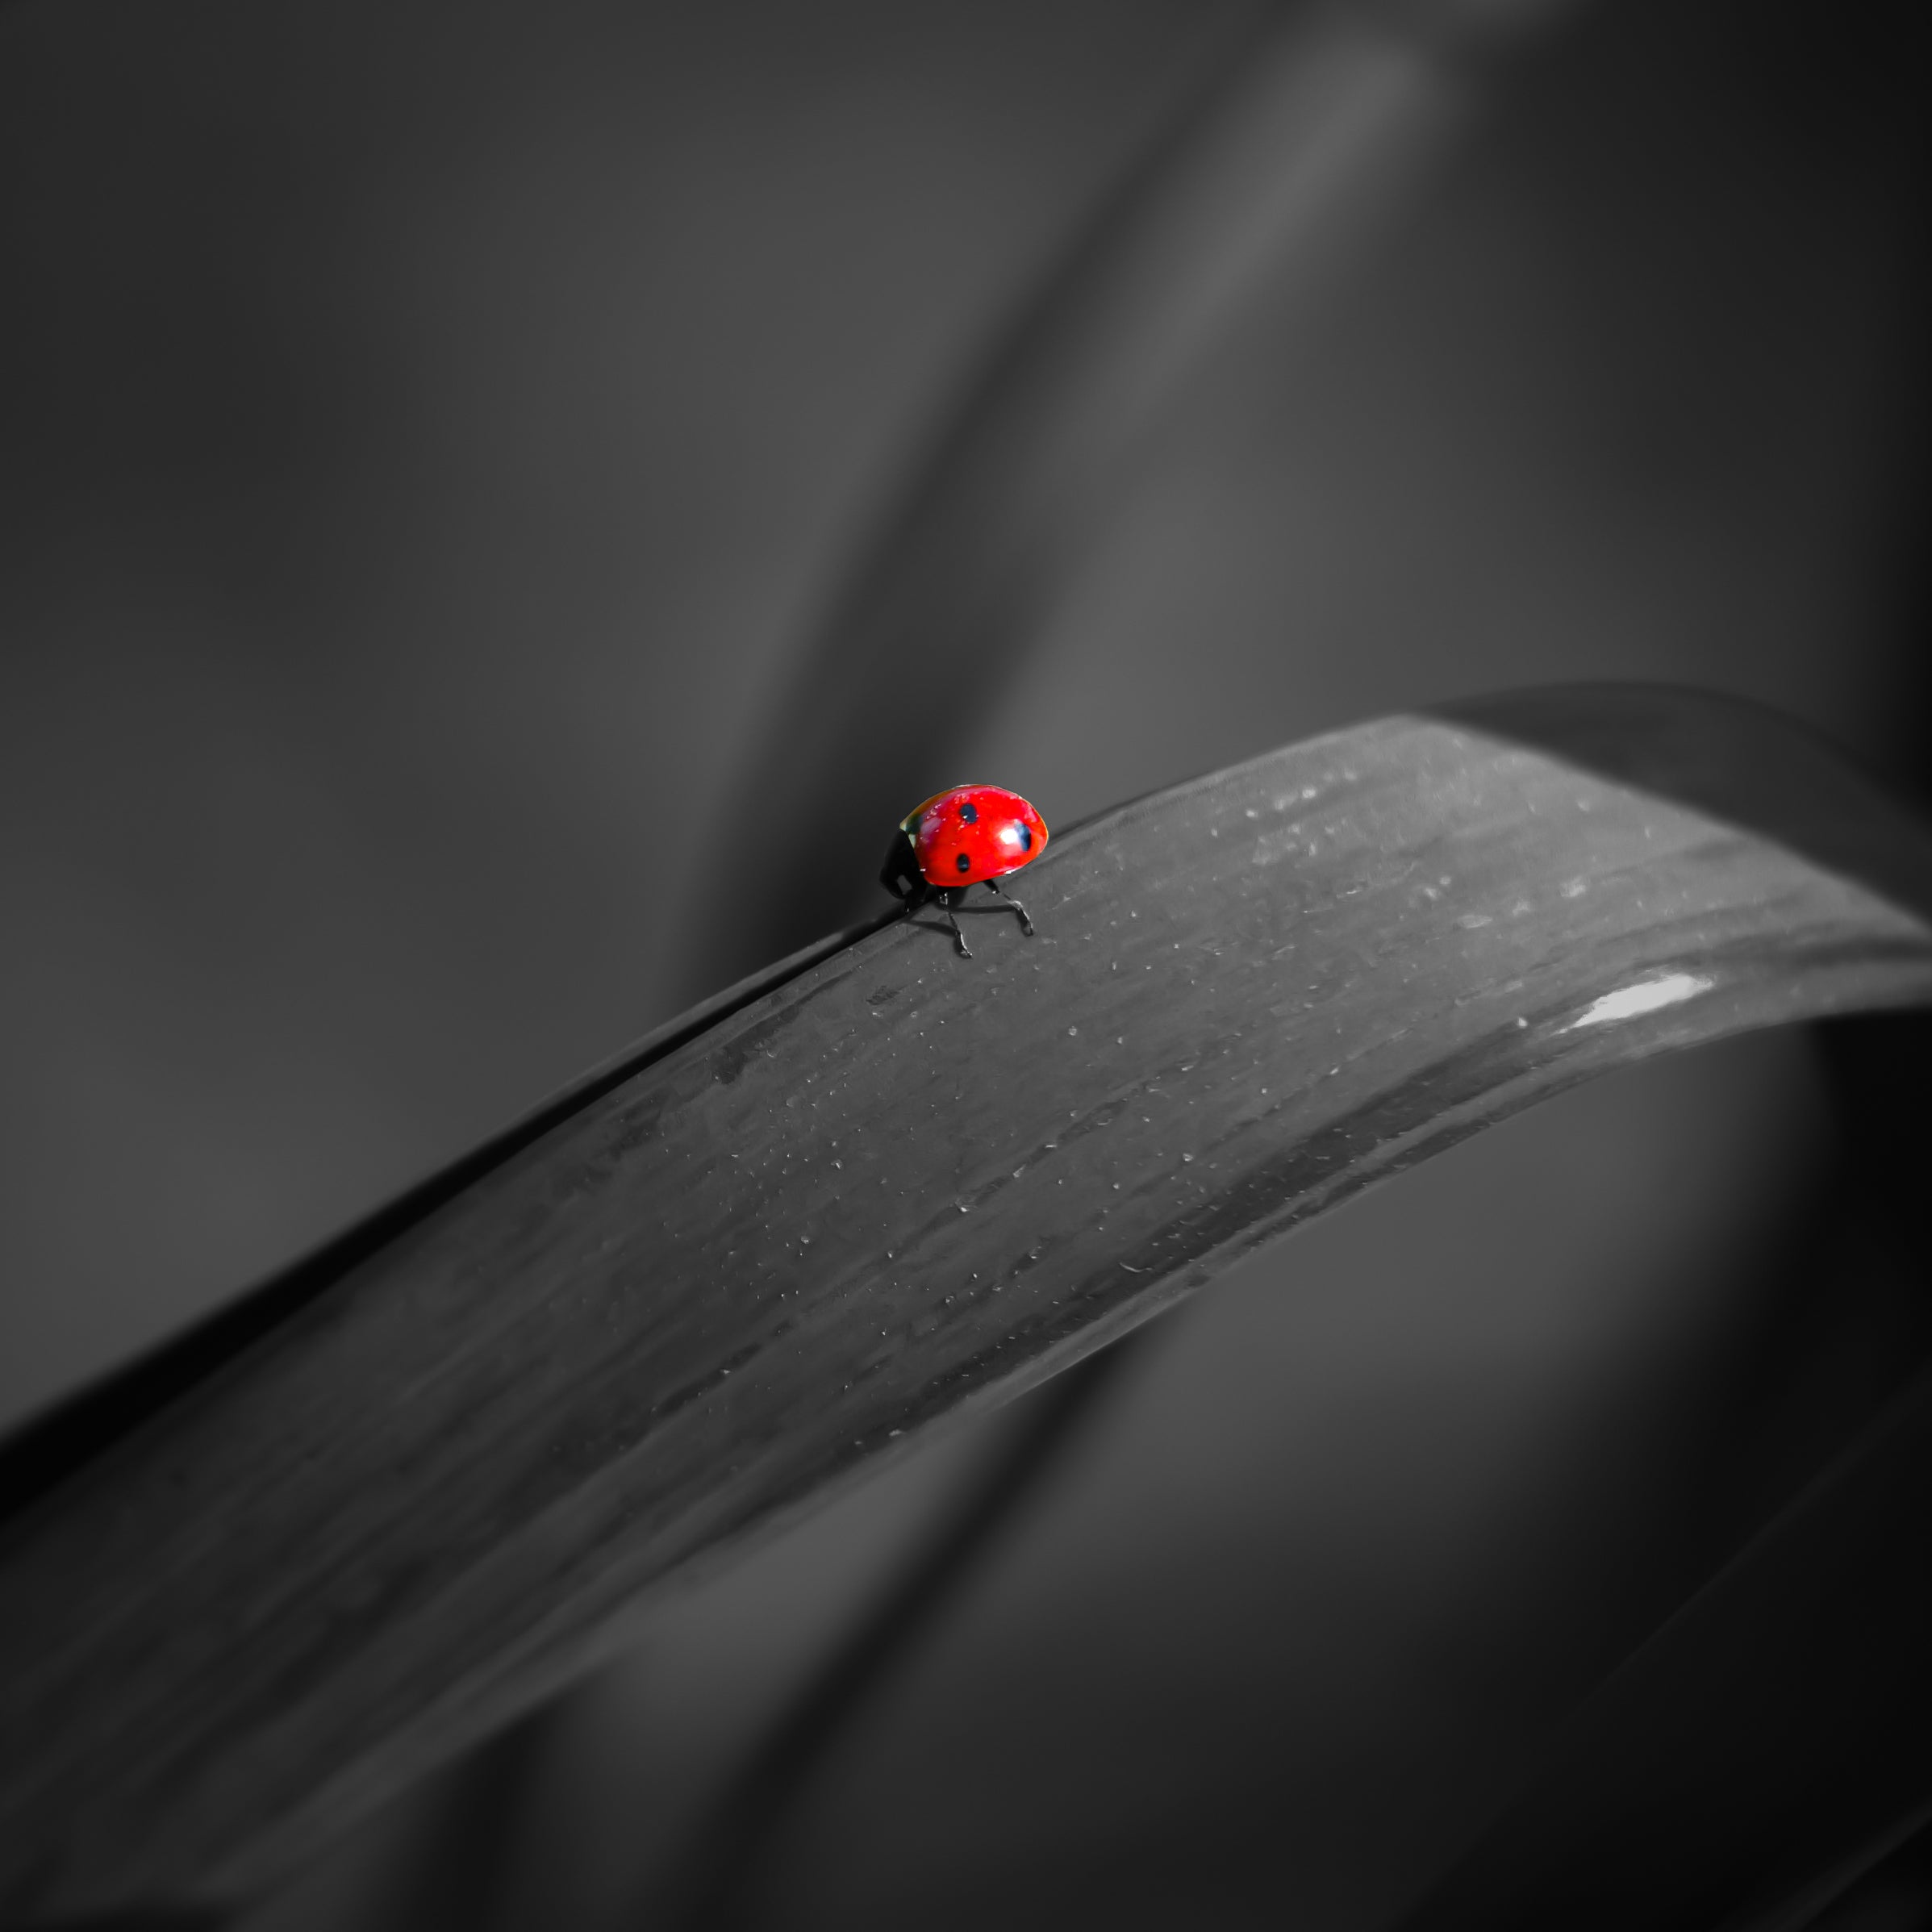 photo of Ladybug in middle of square image, everything except the Ladybug is black and white